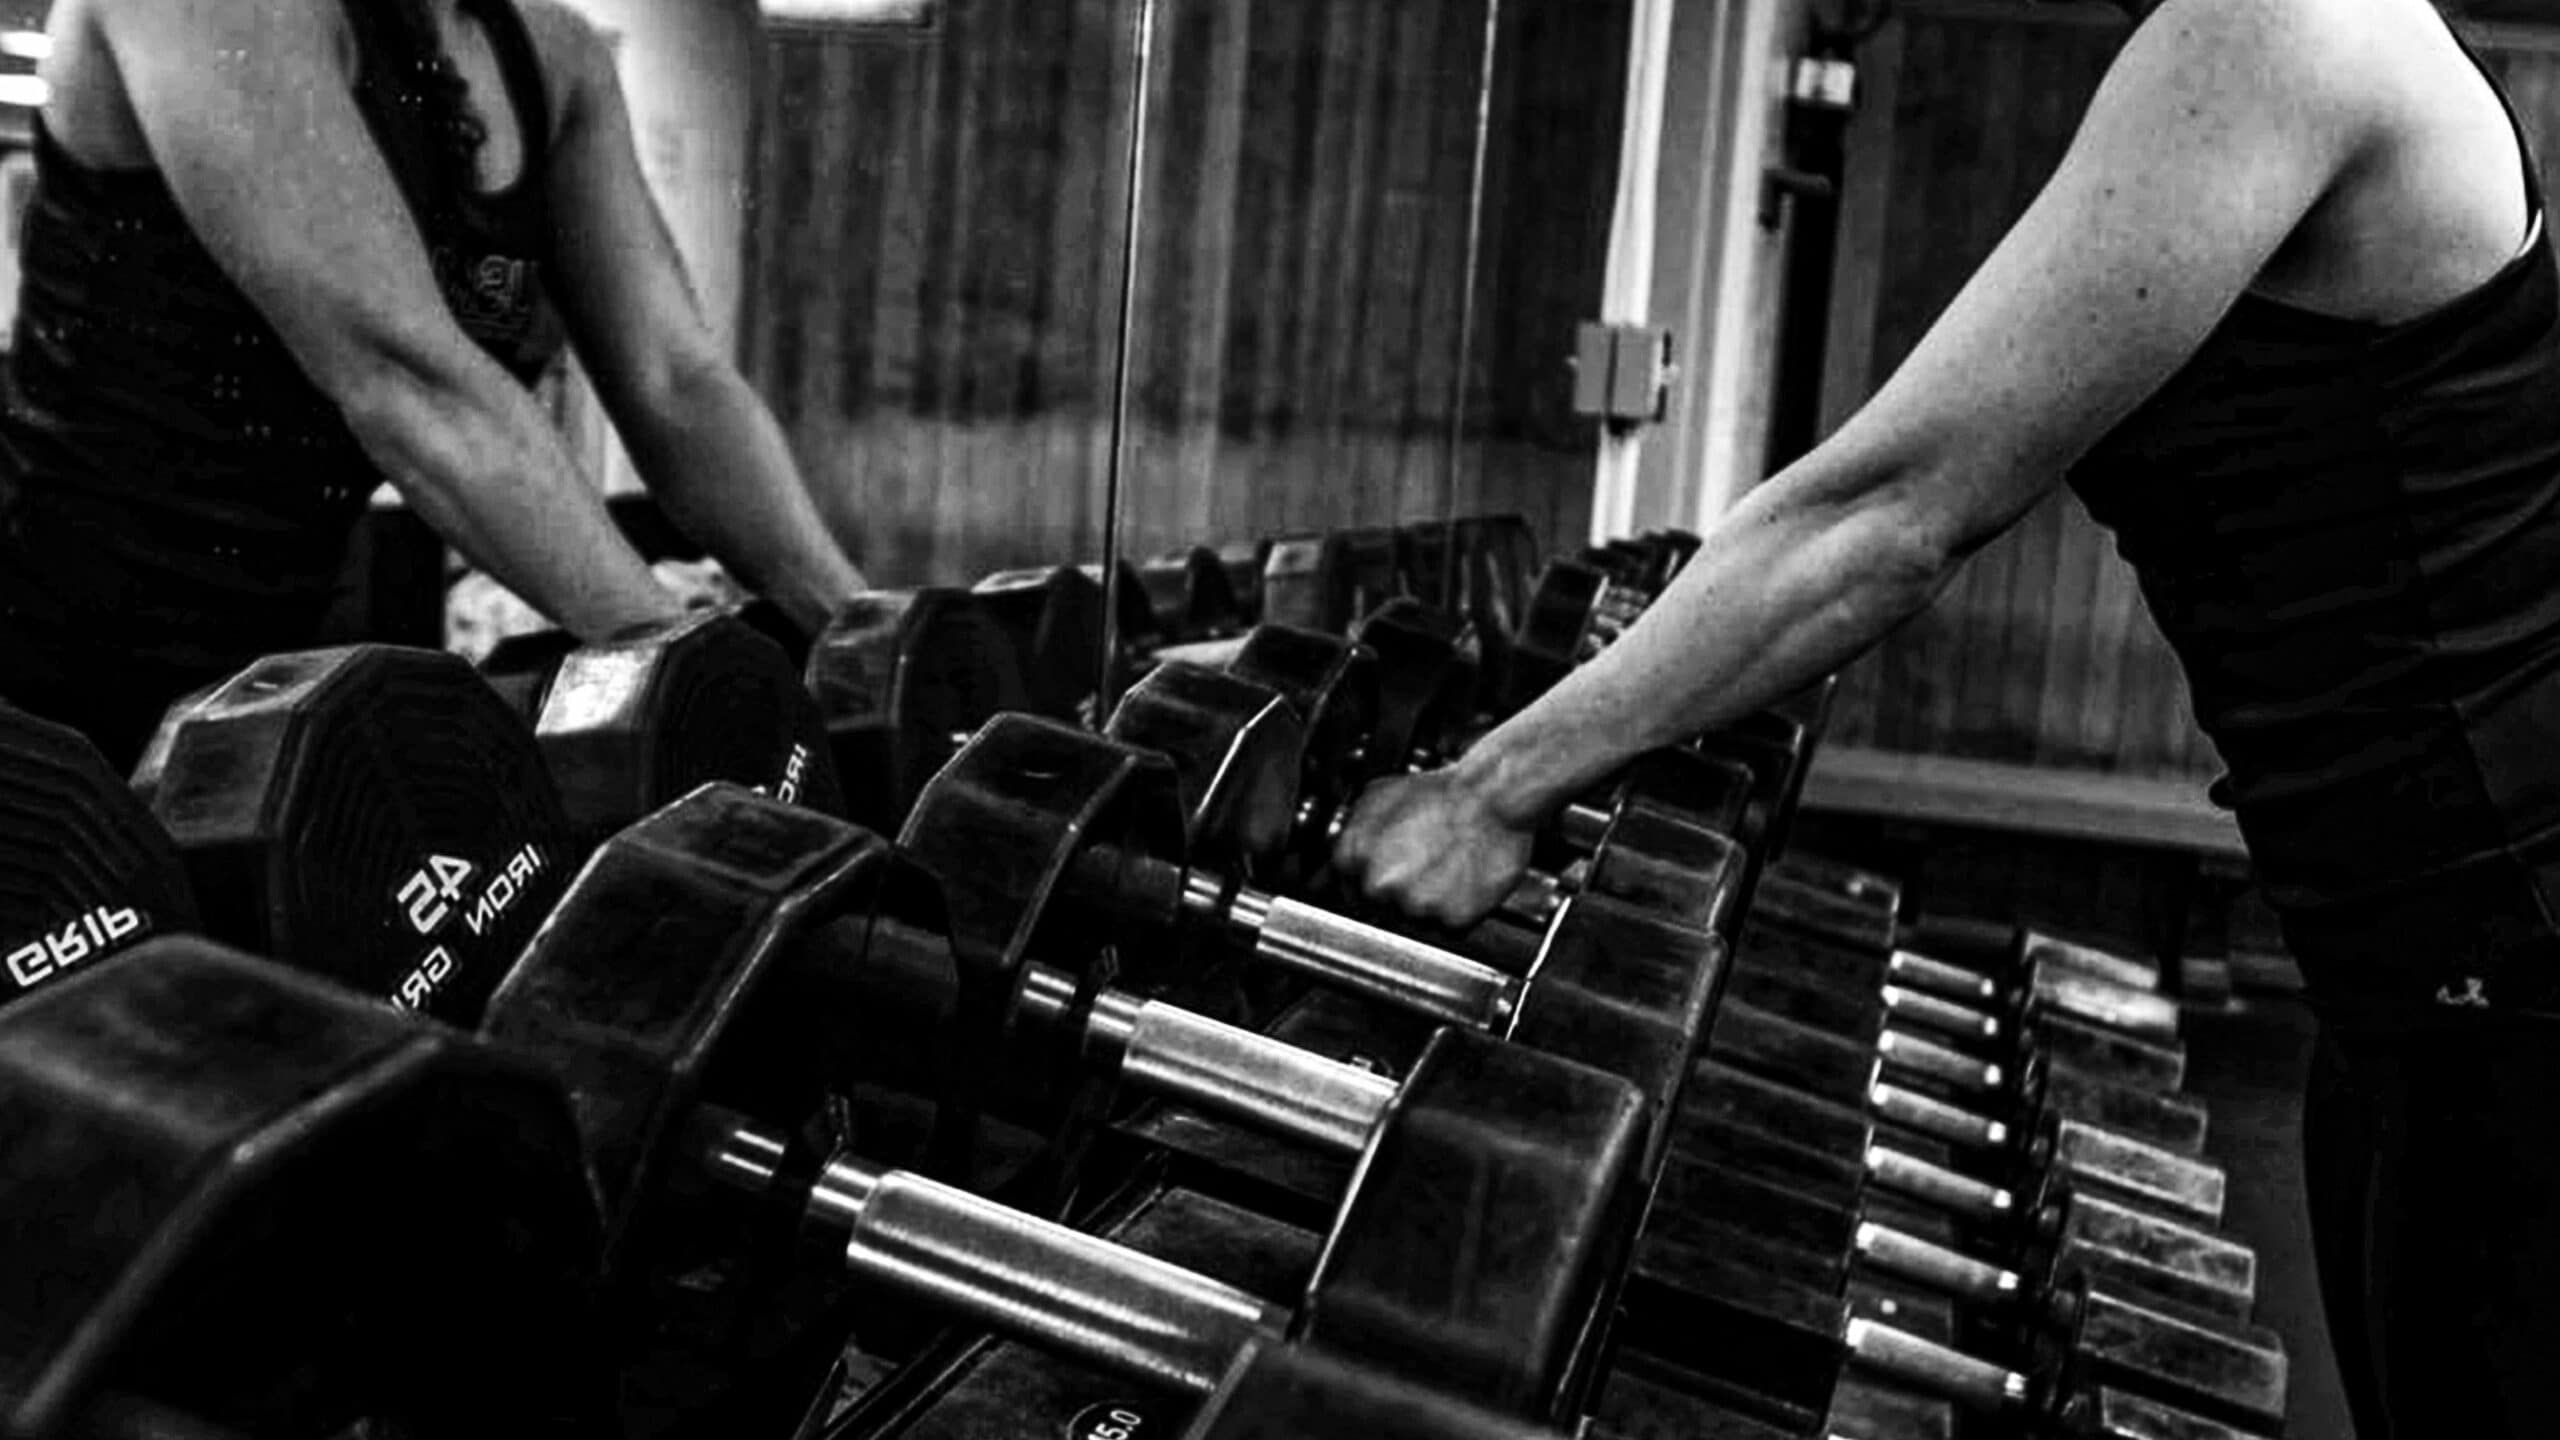 A pair of arms reaching for weights on a rack